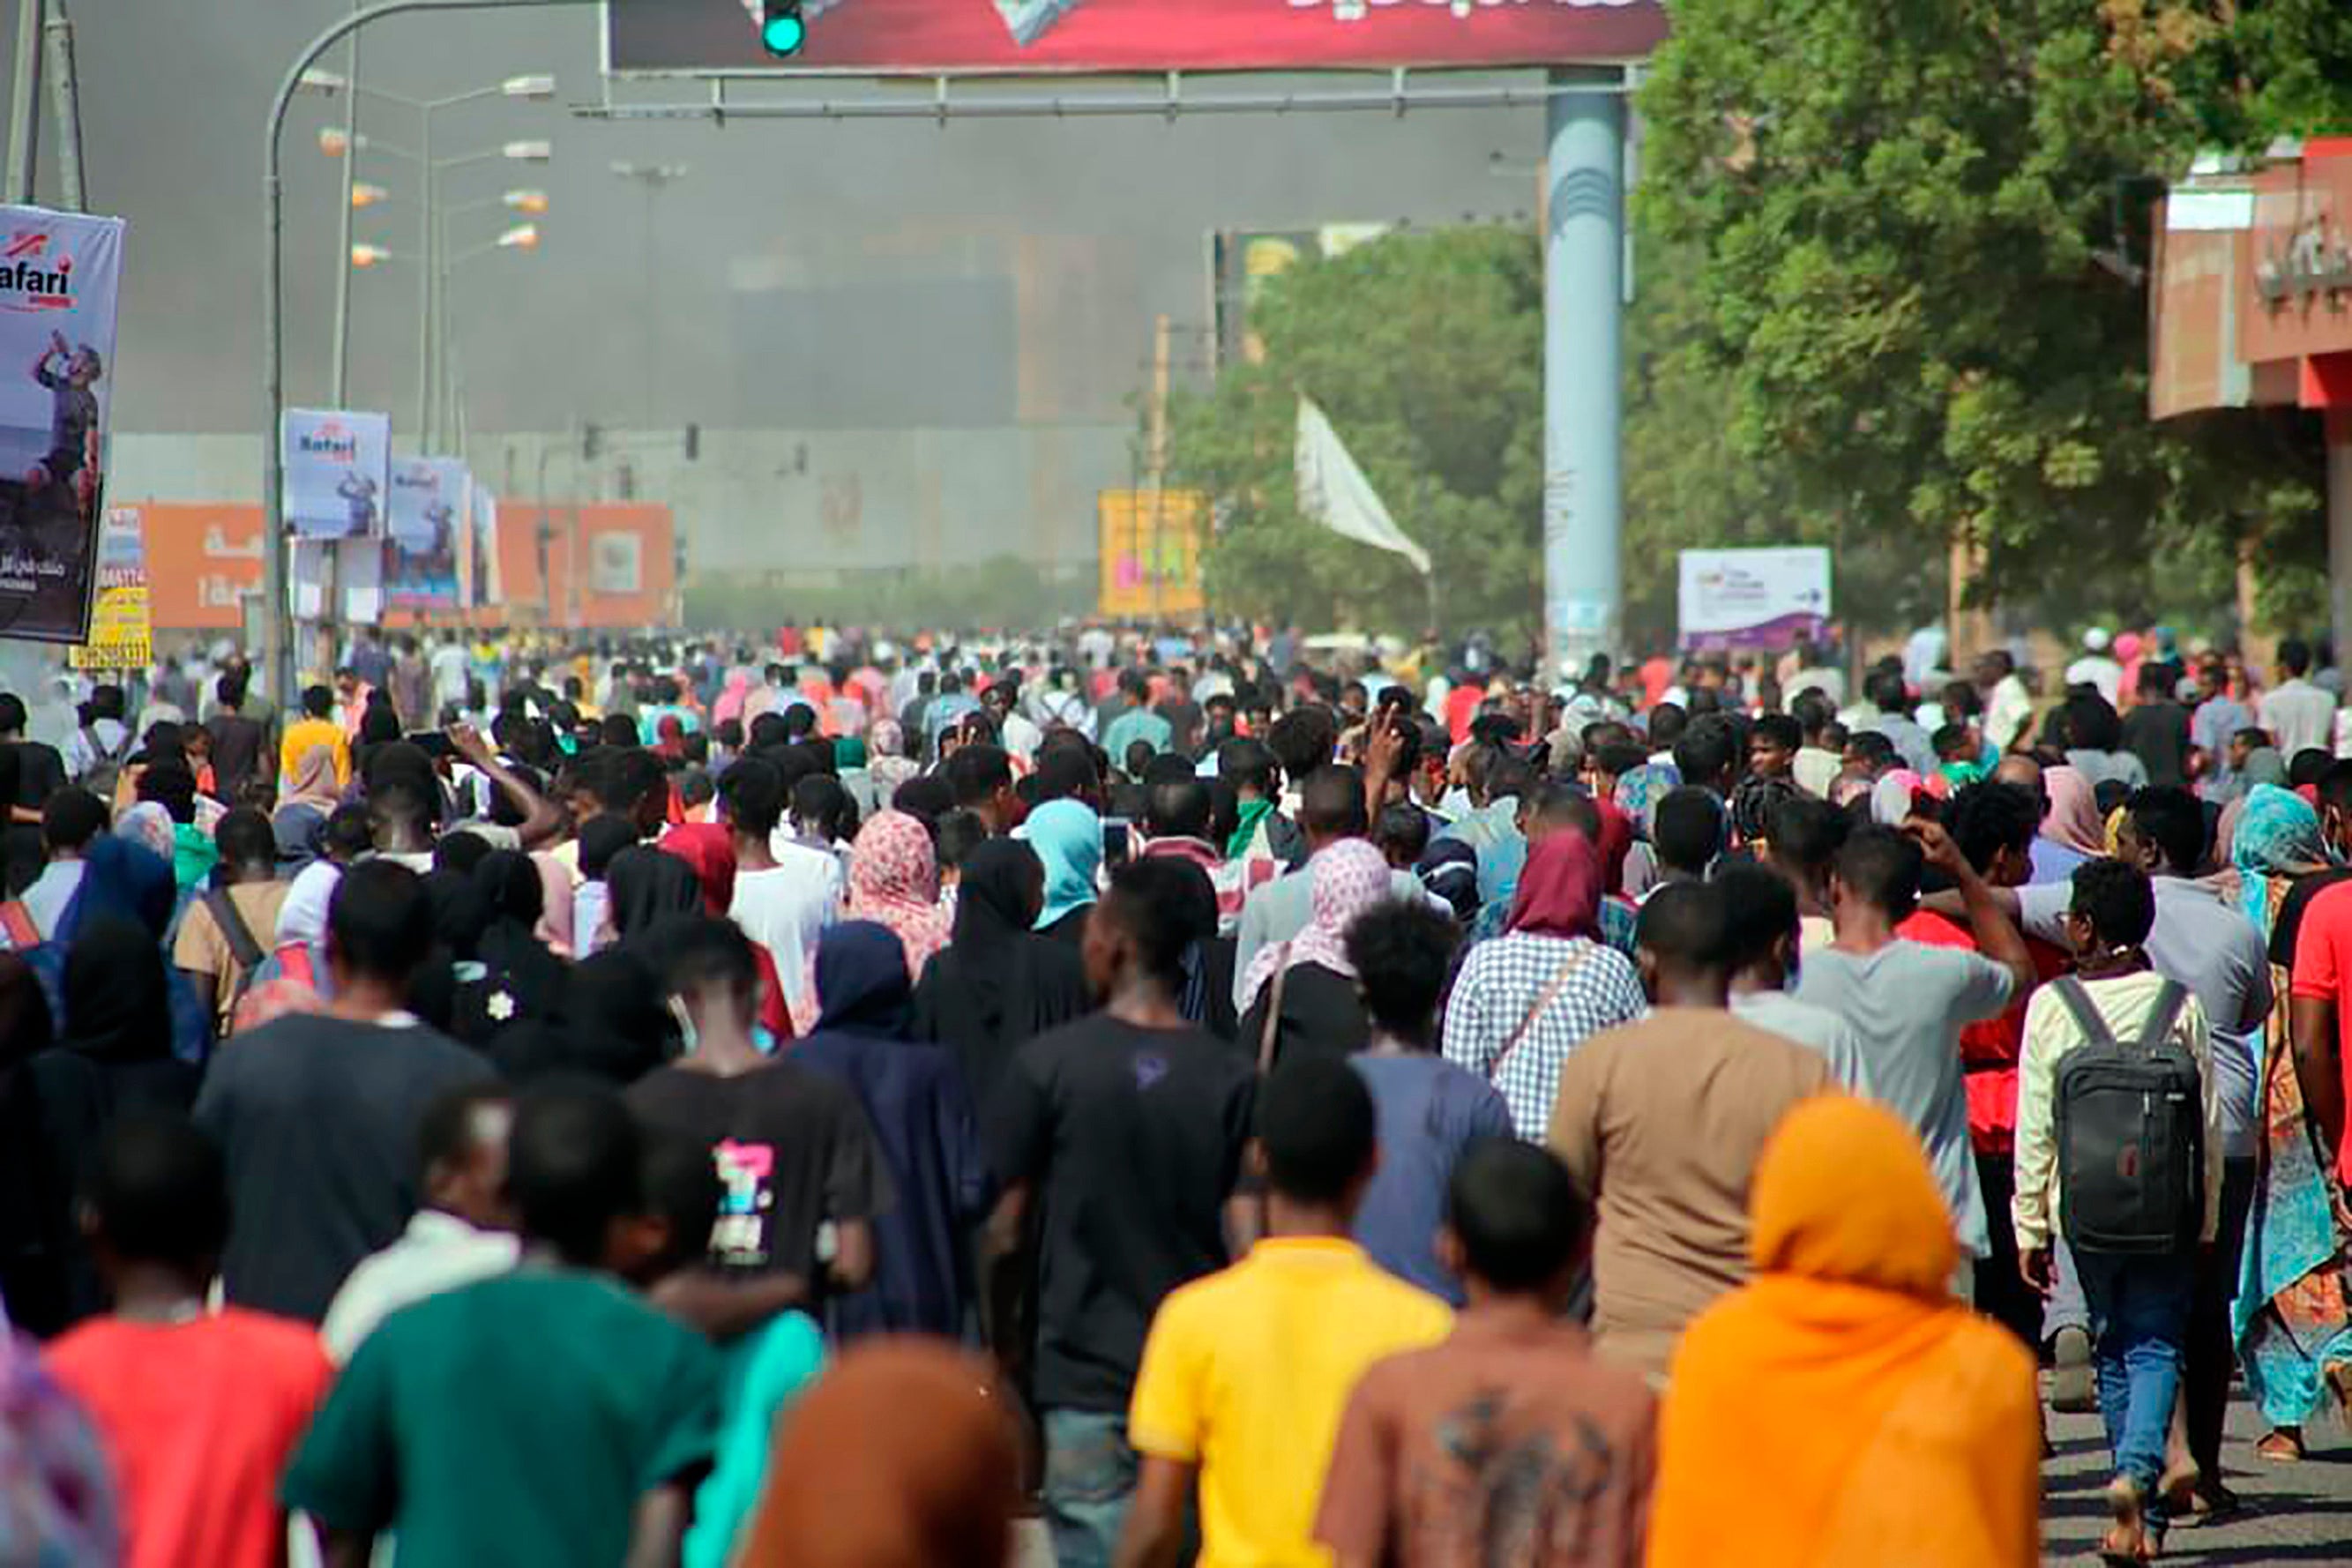 A Return to Business as Usual in Sudan?